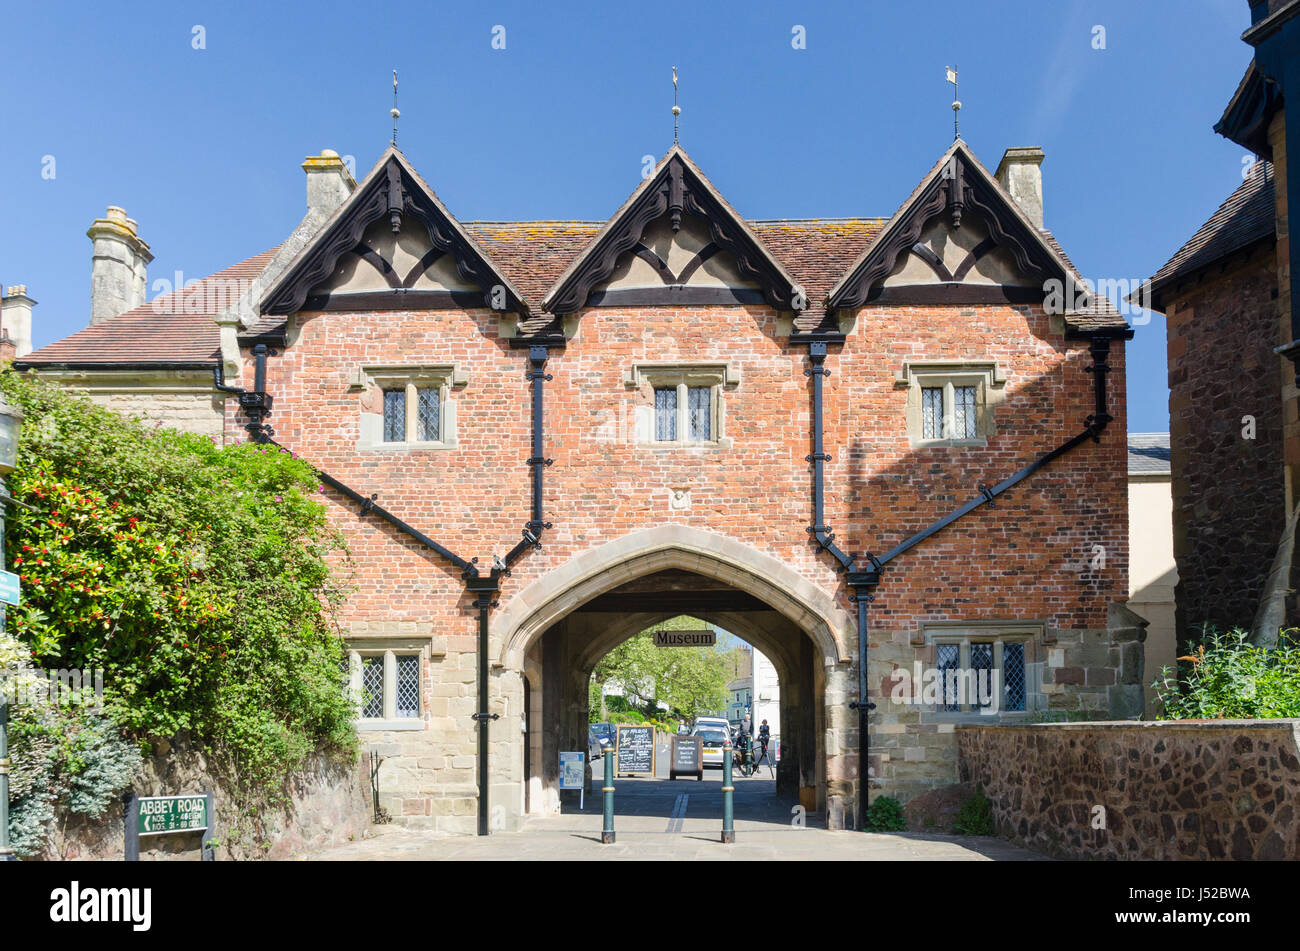 The Abbey Gateway in Great Malvern, Worcestershire which is now home to the Malvern Museum Stock Photo